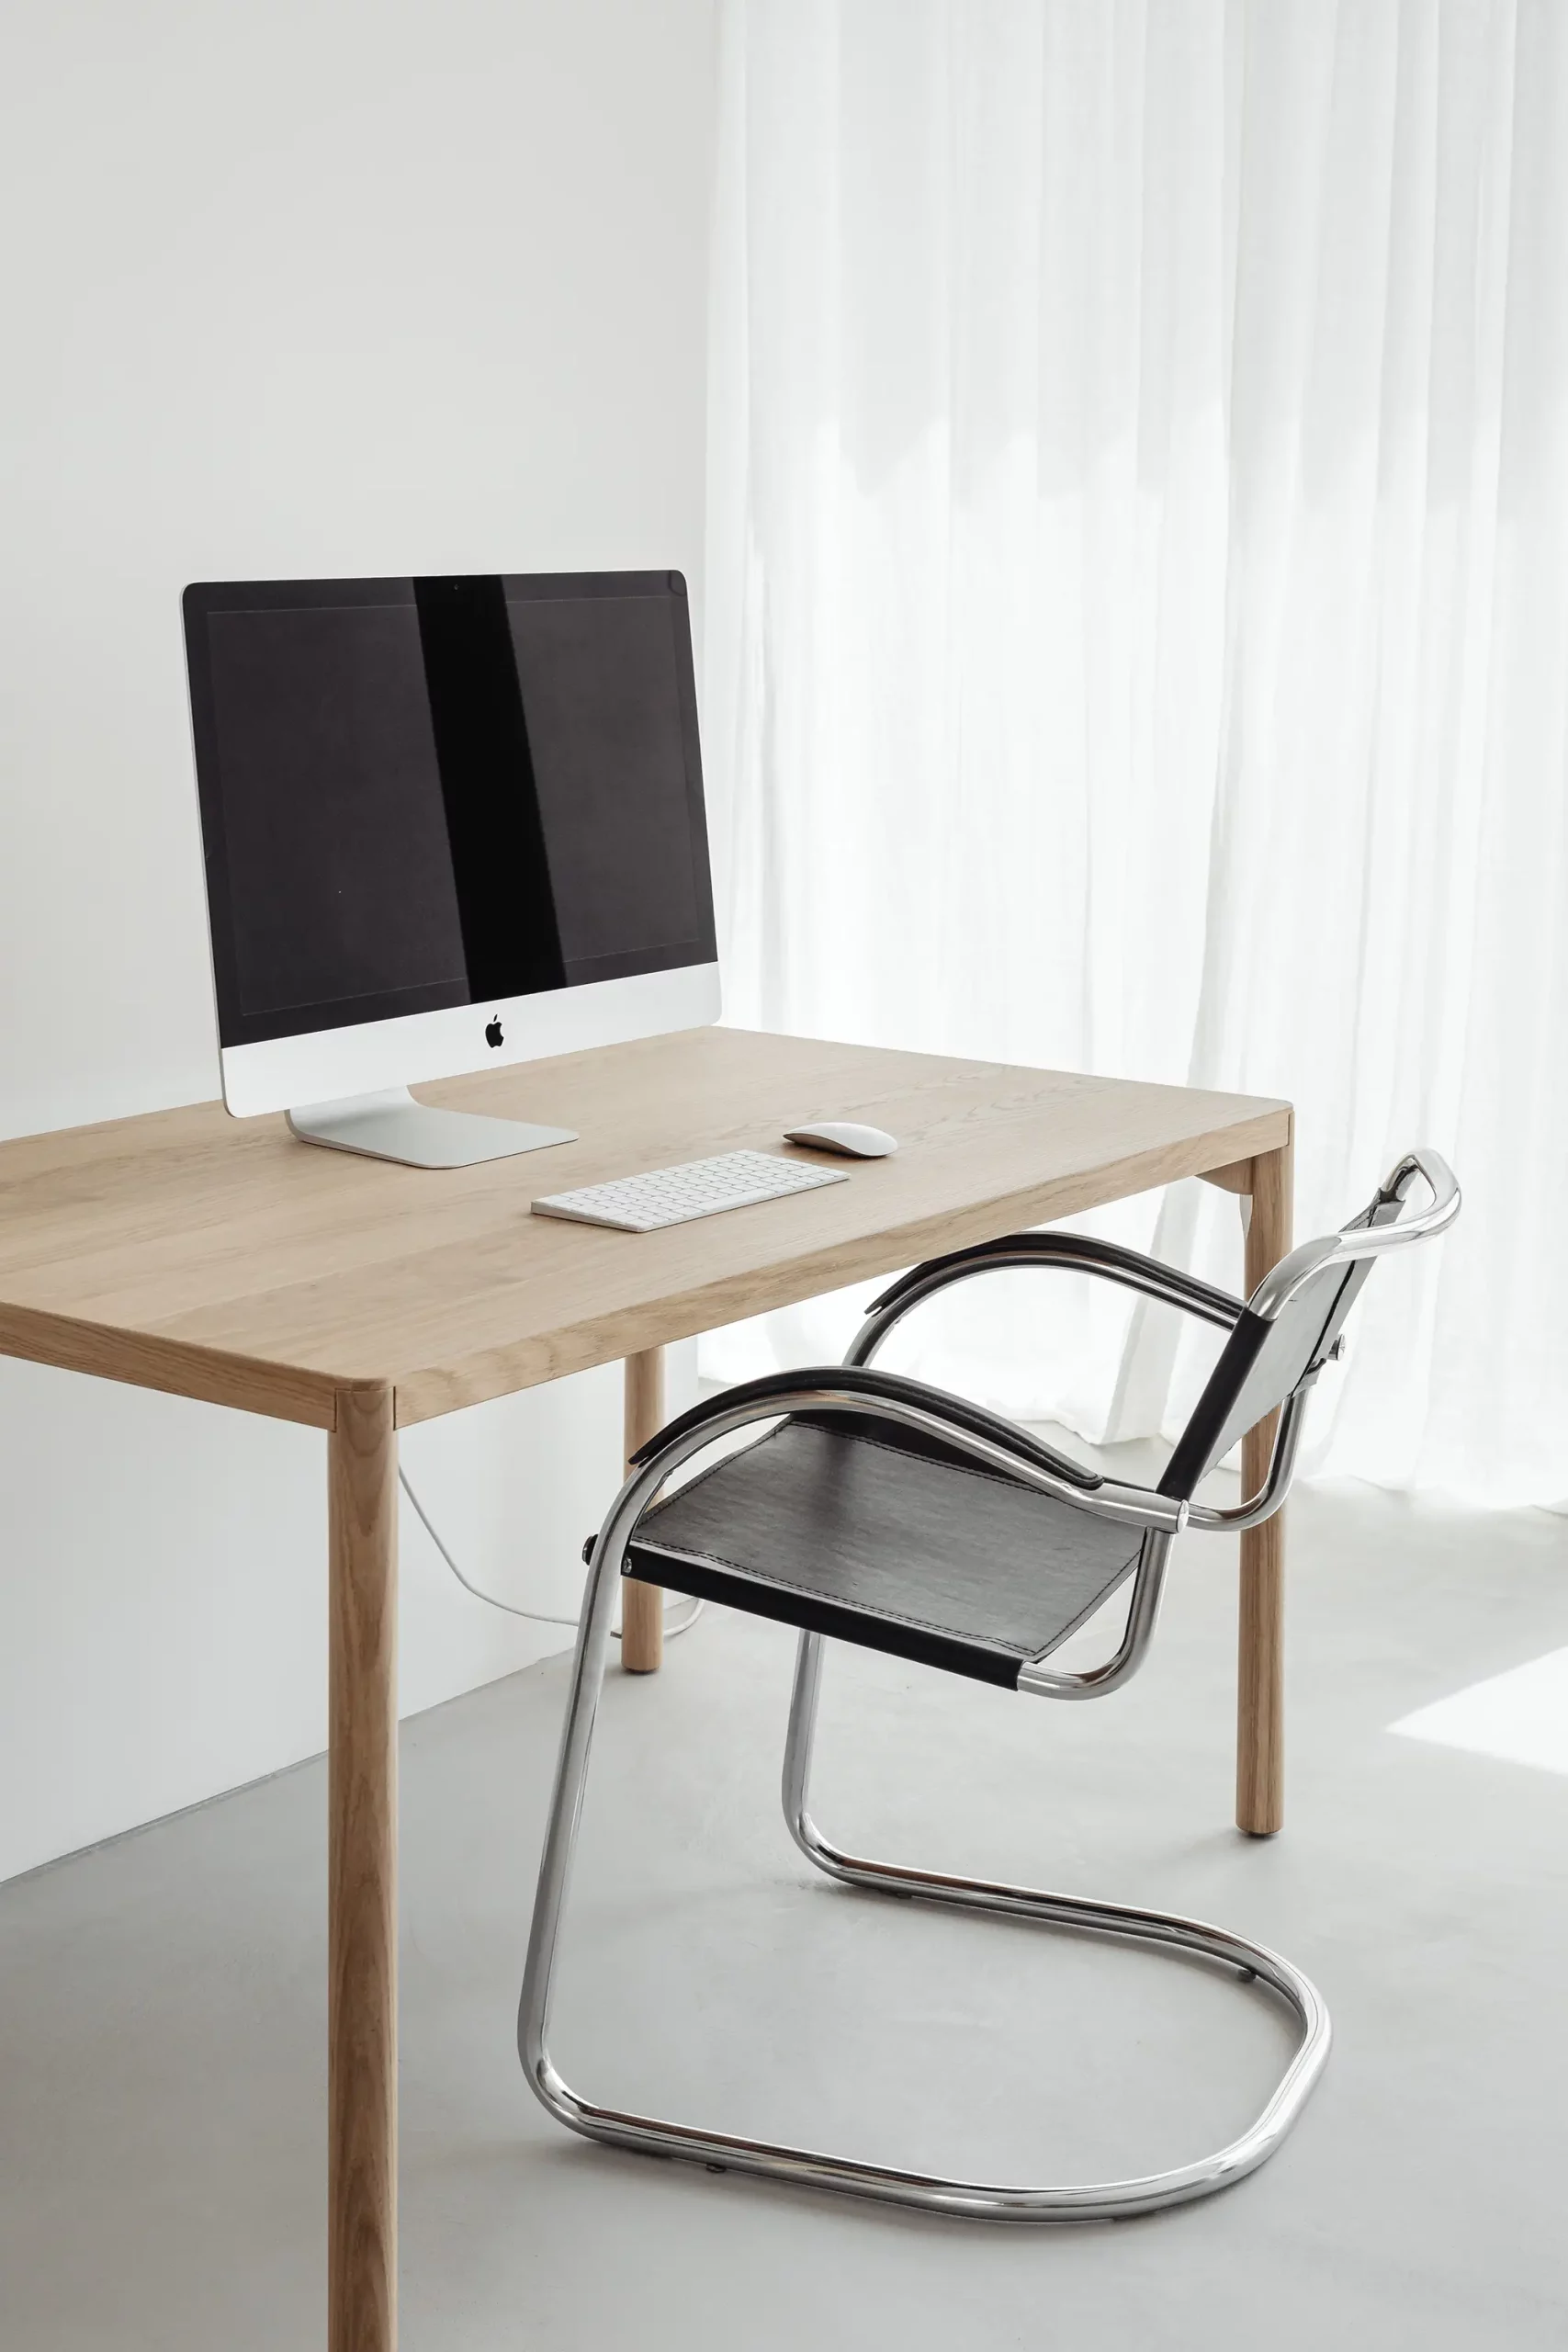 Computer at a timber desk with black desk chair